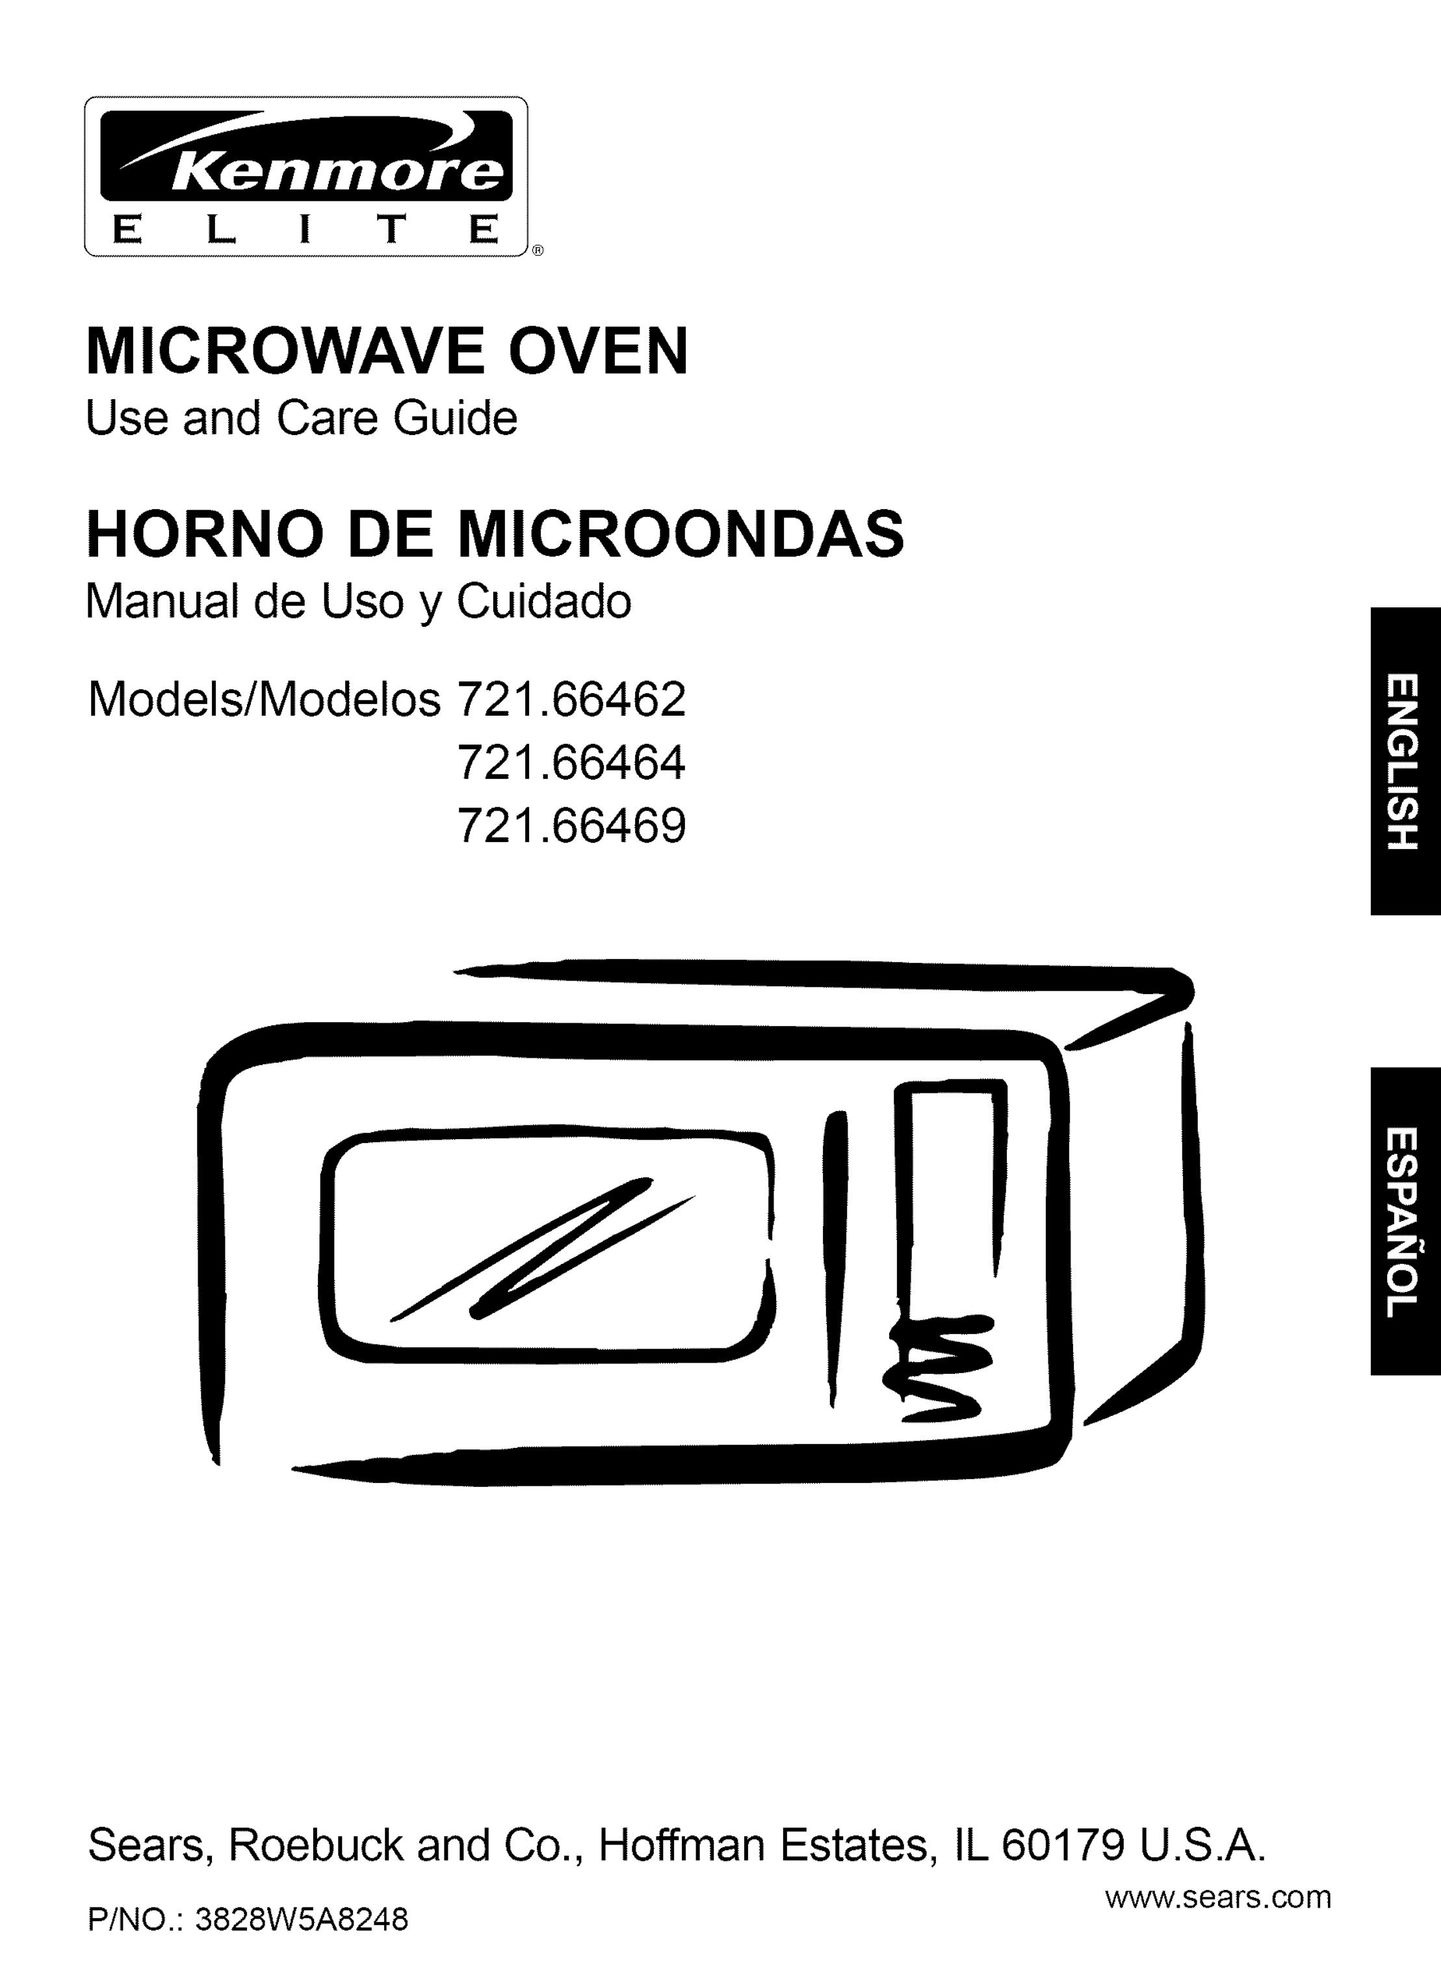 Kenmore 721.66464 Microwave Oven User Manual